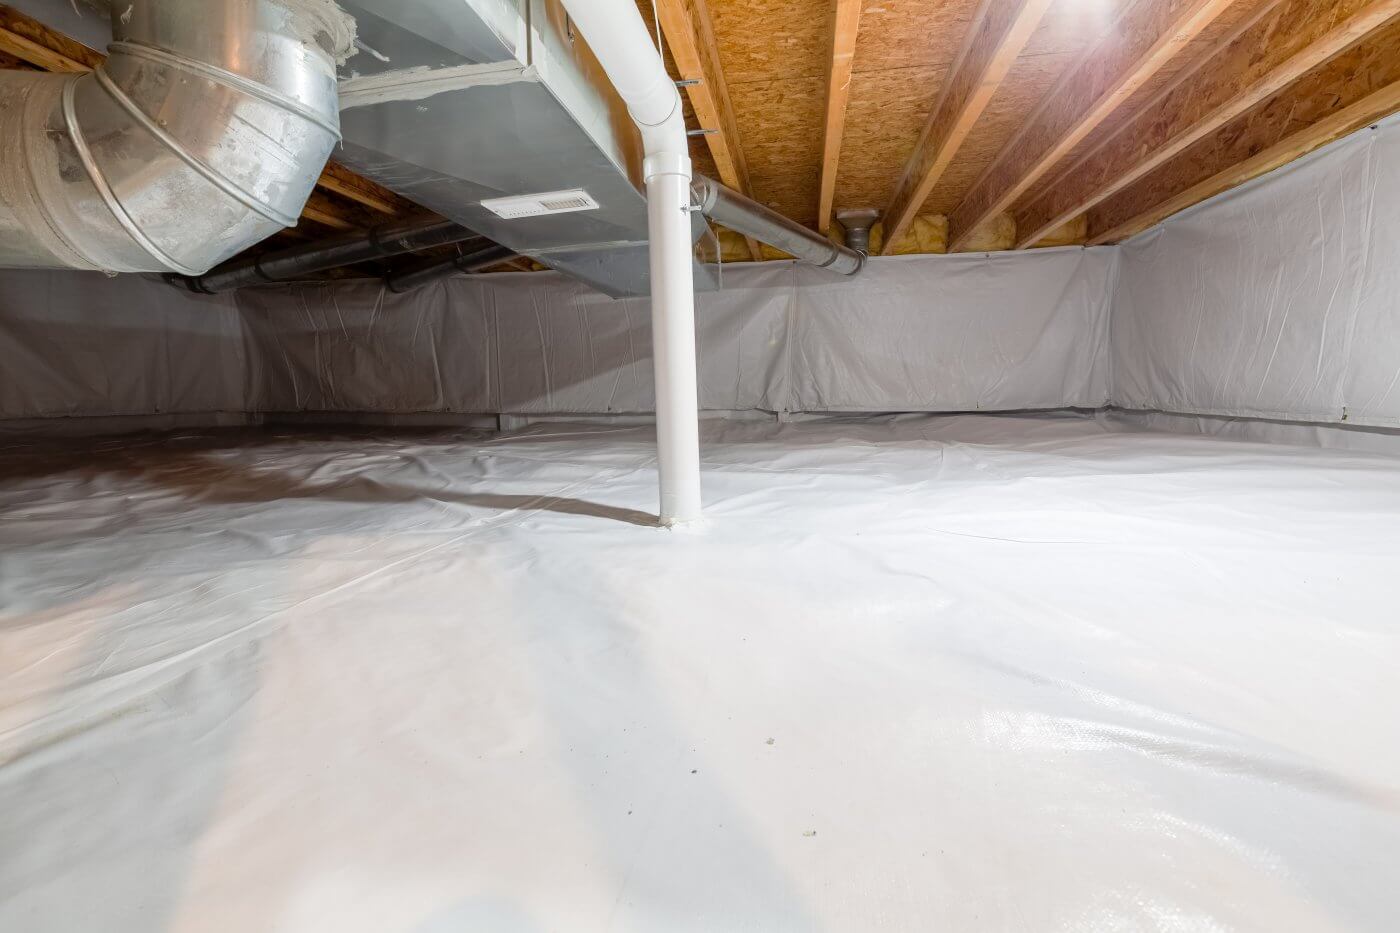 The Do’s and Don’ts of Closed Crawl Space Encapsulation